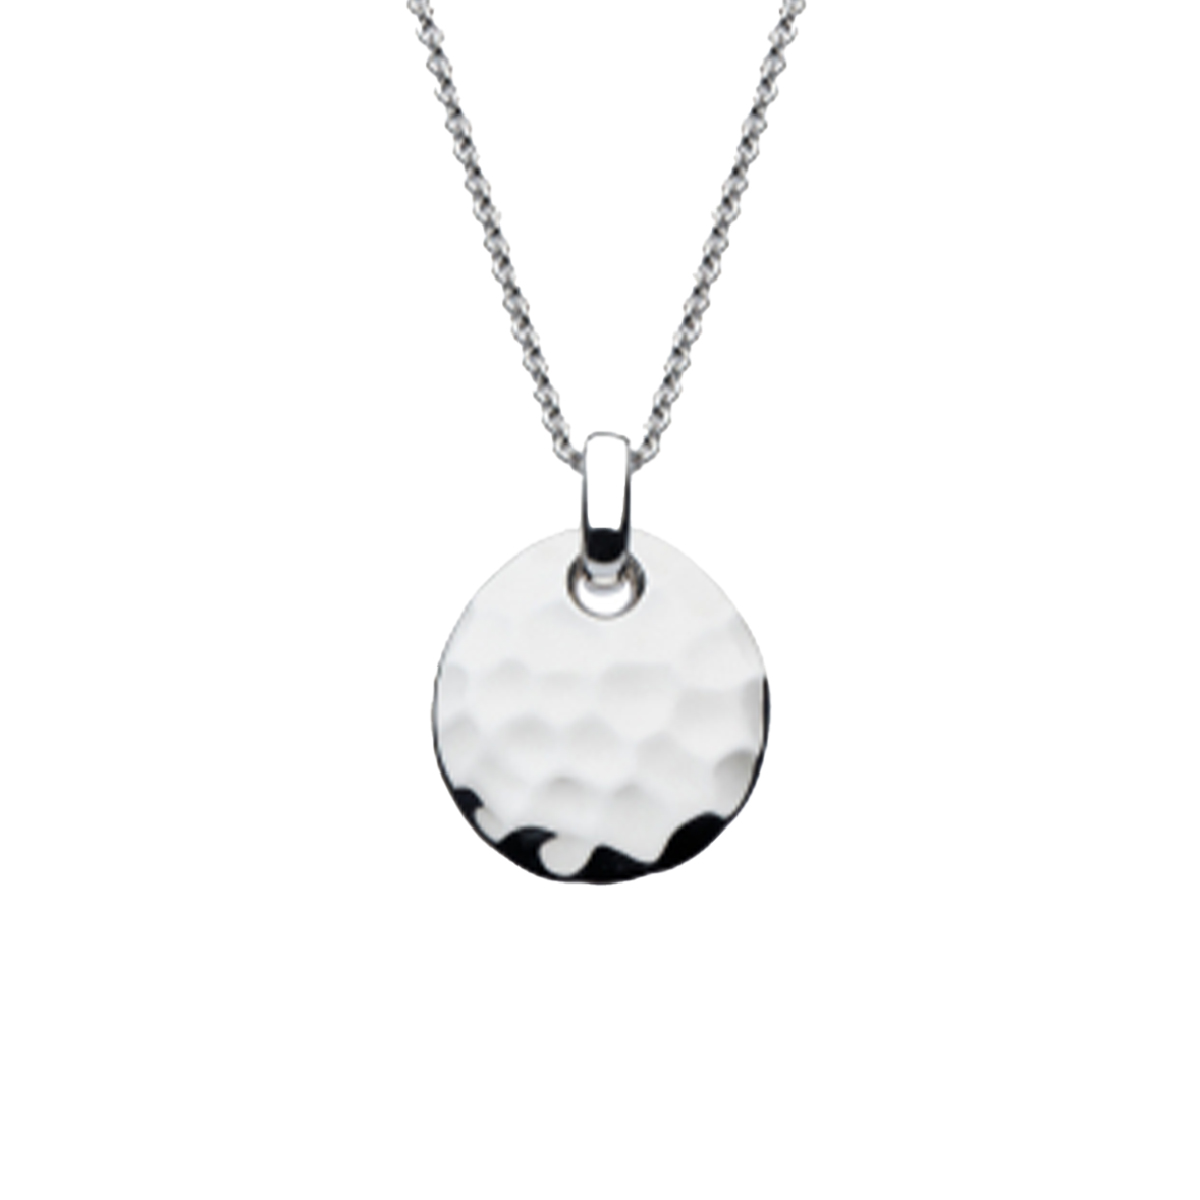 Sterling Silver Hammered Disc Pendant with Chain